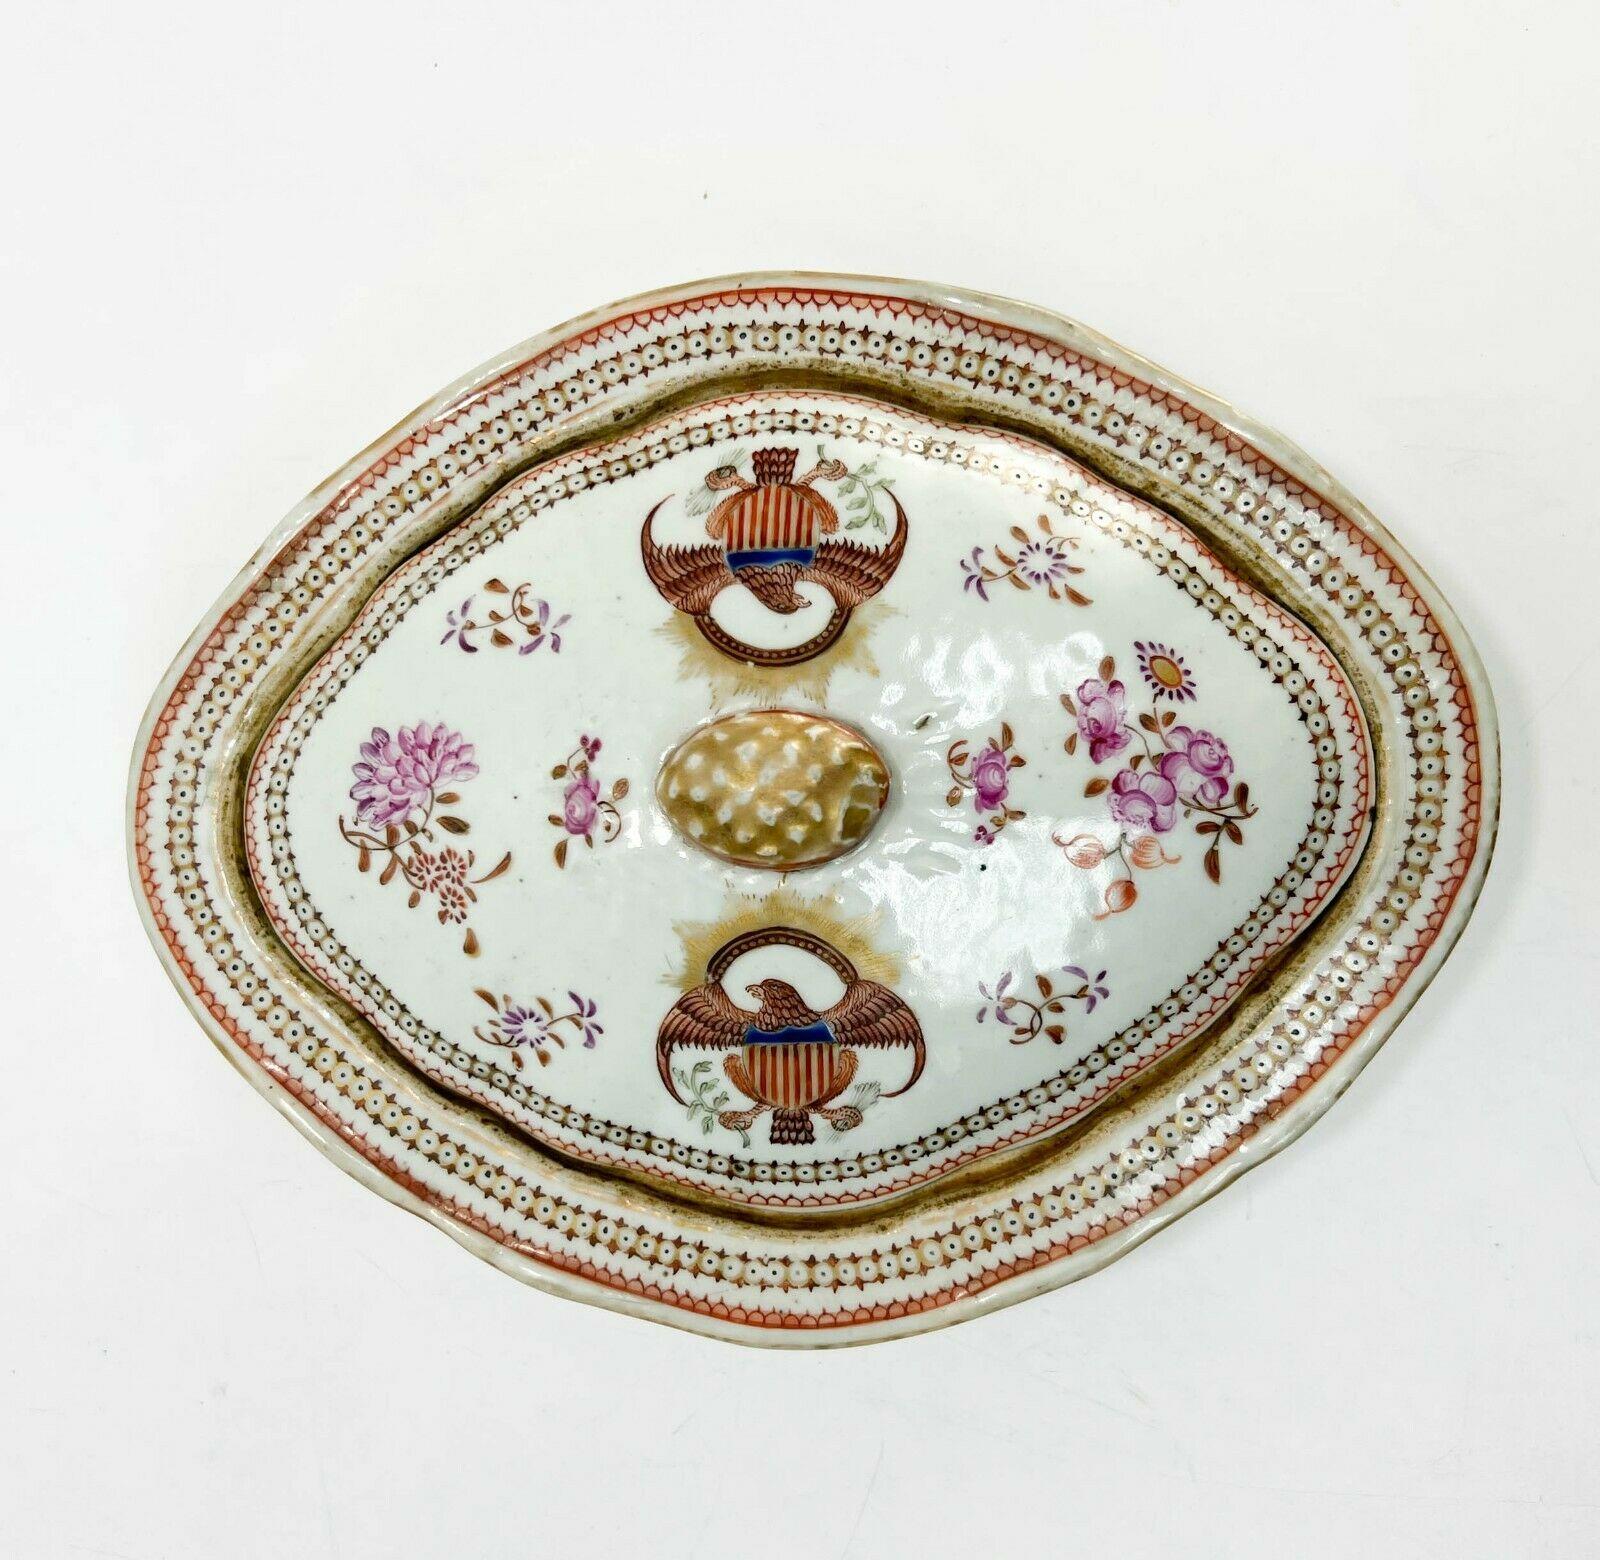 Chinese Export Porcelain Covered Serving Bowl, American Eagles, circa 1820

Oval-shaped bowl decorated with American eagles with shields and florals to the lid. Gilt accents. Finial lid. Red, brown, and gilt patterns to the edges. 

Additional